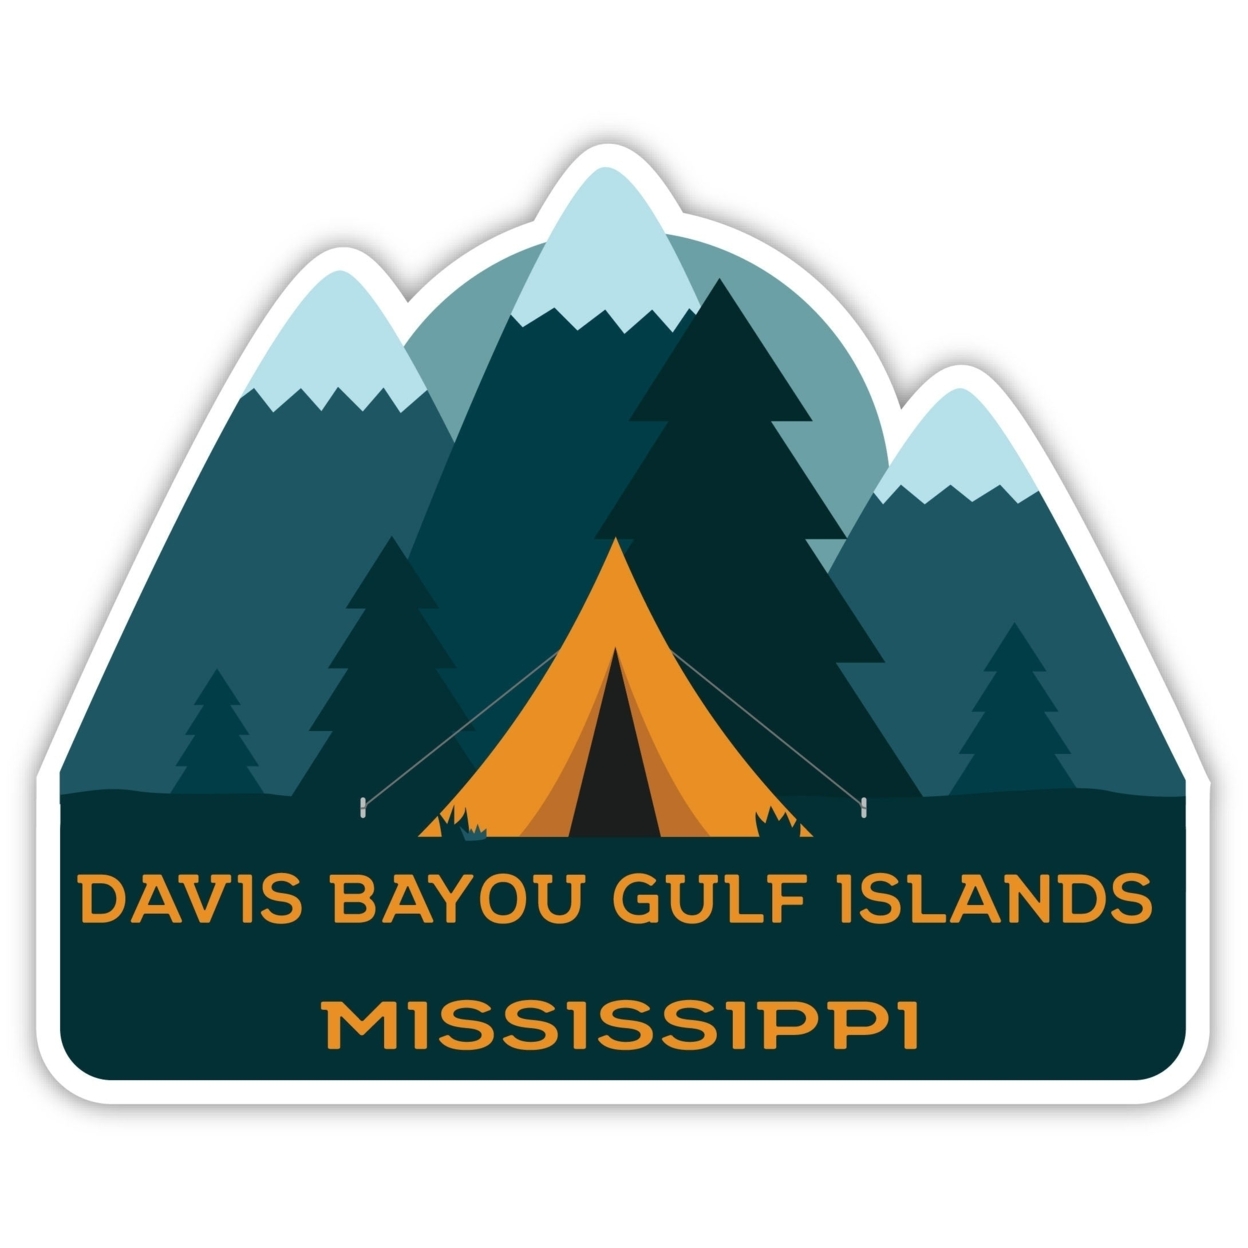 Davis Bayou Gulf Islands Mississippi Souvenir Decorative Stickers (Choose Theme And Size) - 4-Pack, 8-Inch, Tent